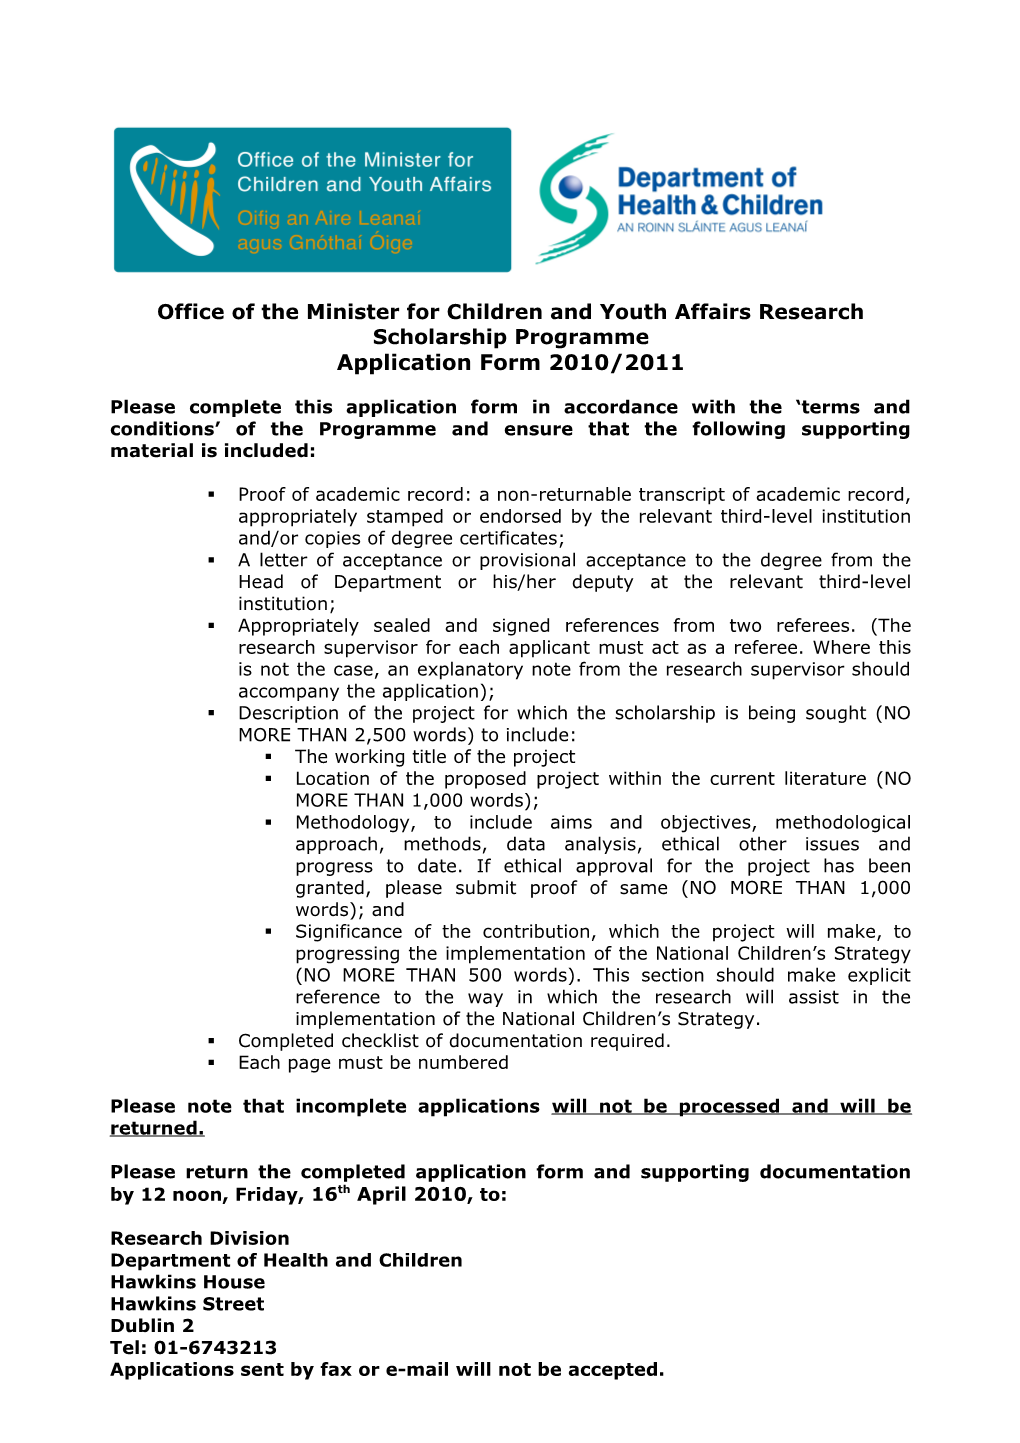 Office of the Minister for Children and Youth Affairs Research Scholarship Programme